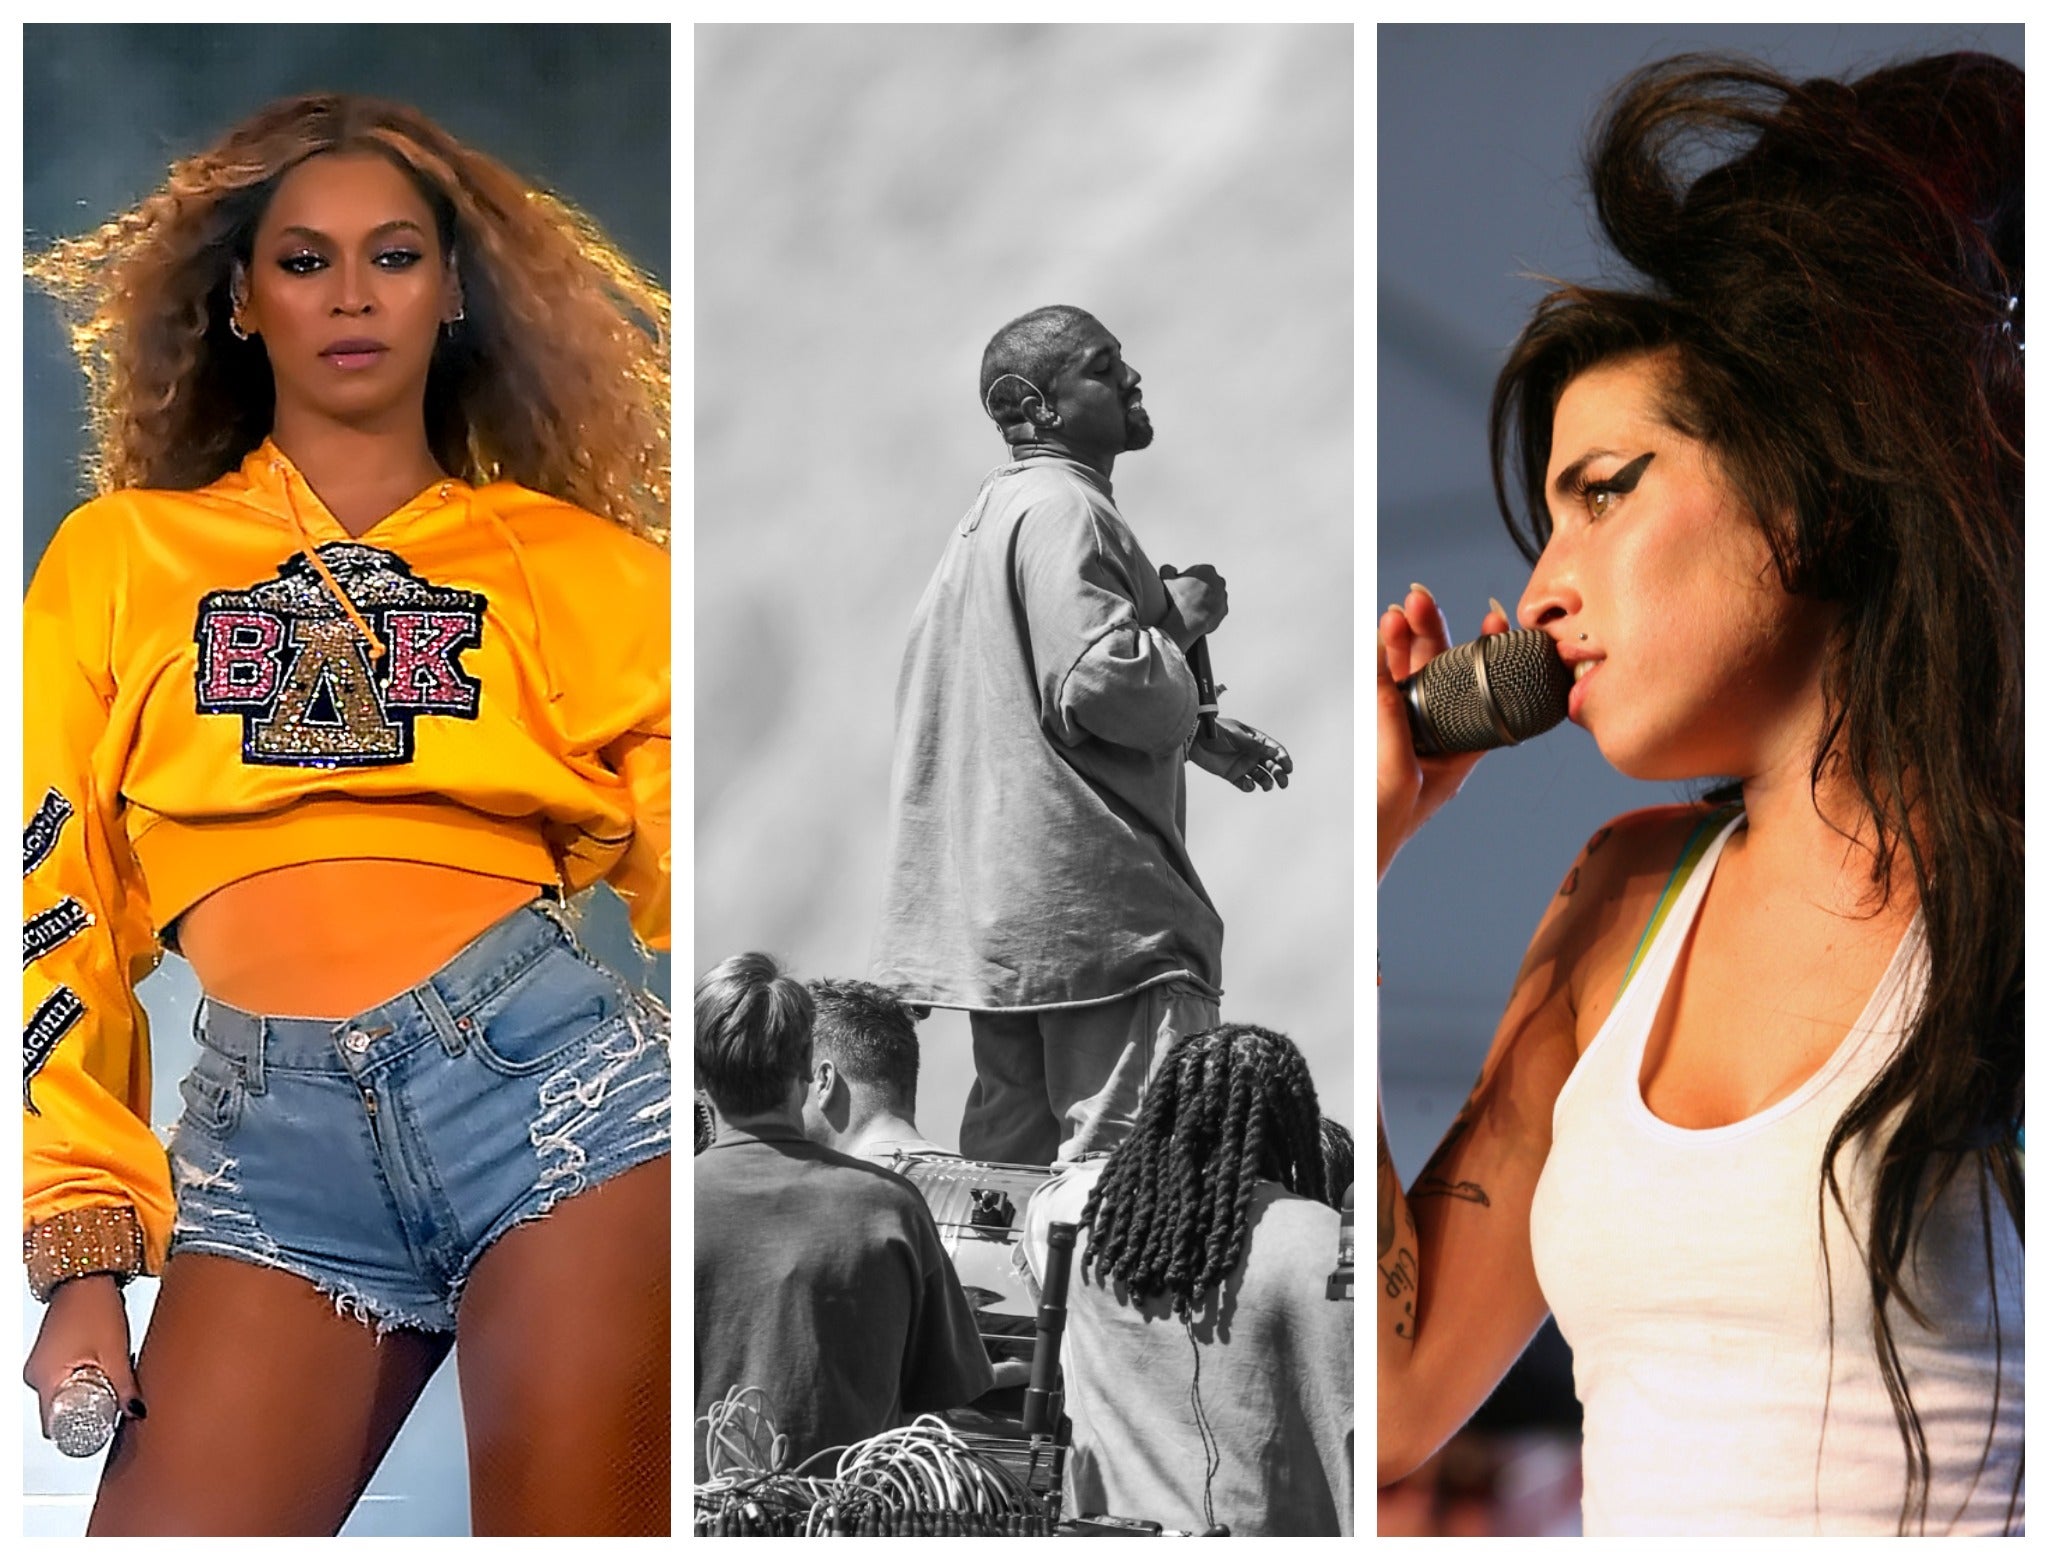 <p>L-R: Beyonce, Kanye West and Amy Winehouse during their Coachella performances</p>